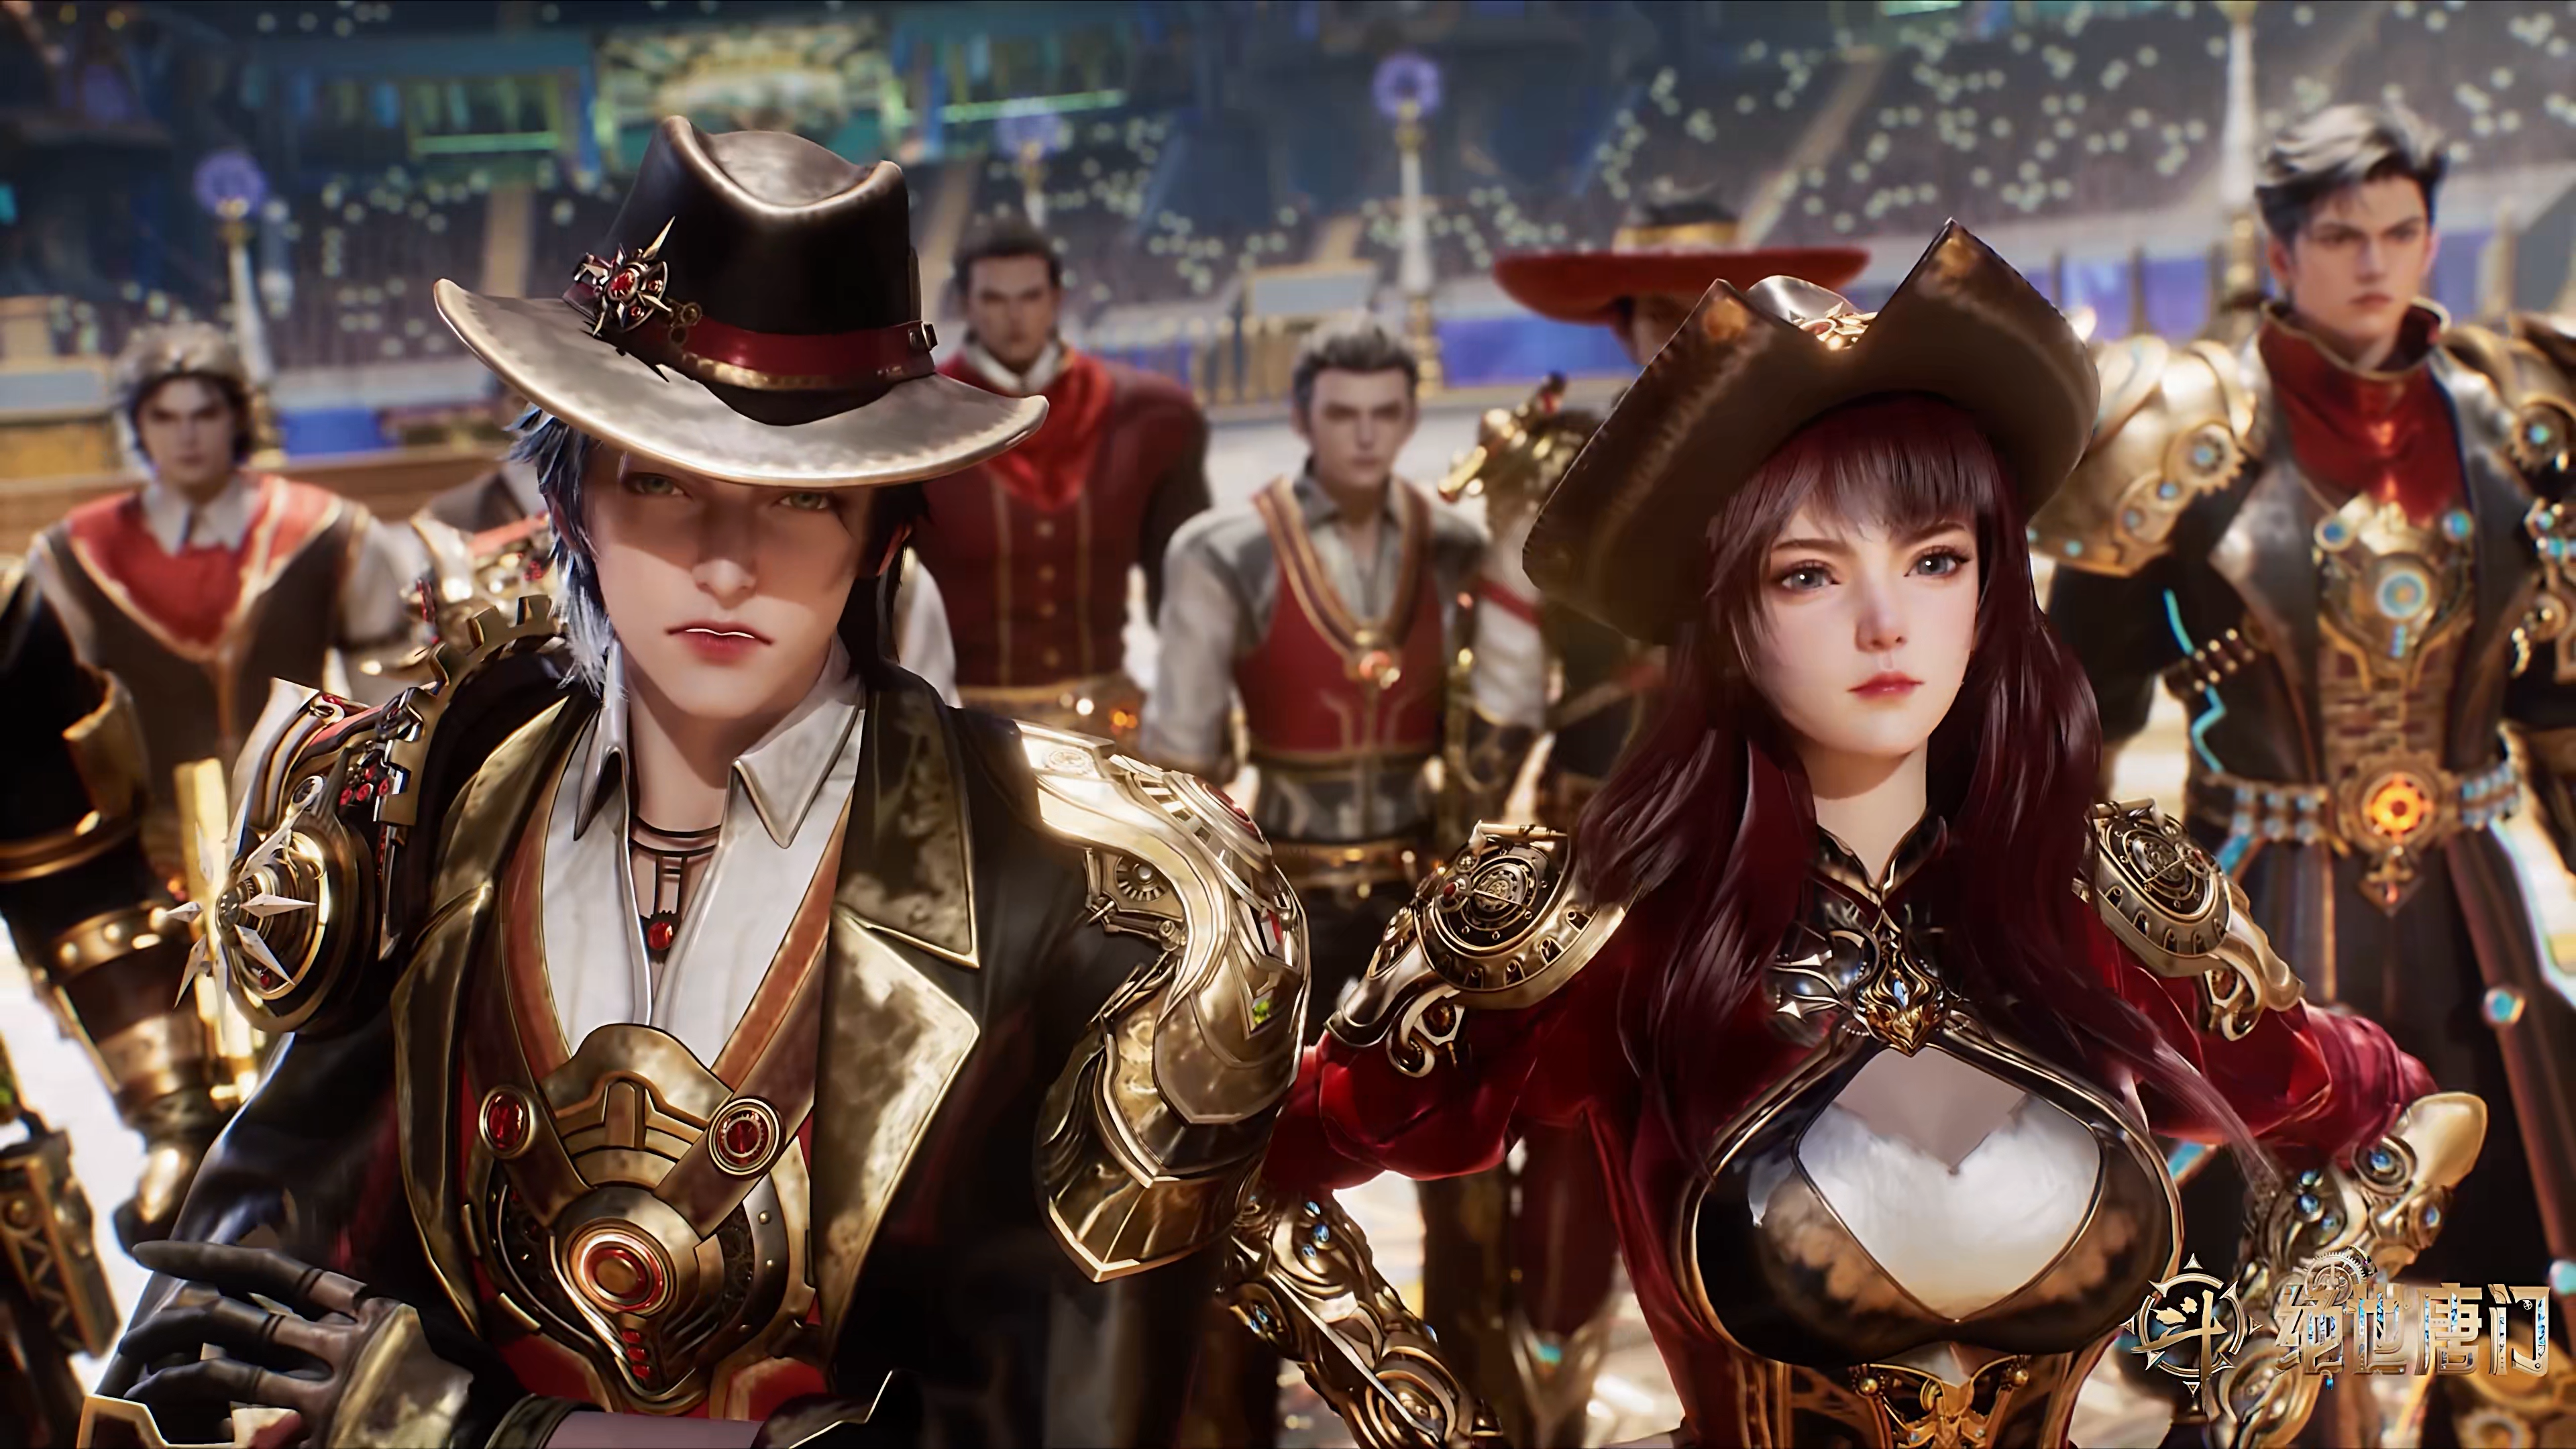 General 3840x2160 Dou Luo Da Lu Jue Shi Tang Men title fantasy art fantasy girl long hair fantasy men hat men with hats looking at viewer gears steampunk closed mouth parted lips standing depth of field kanji CGI